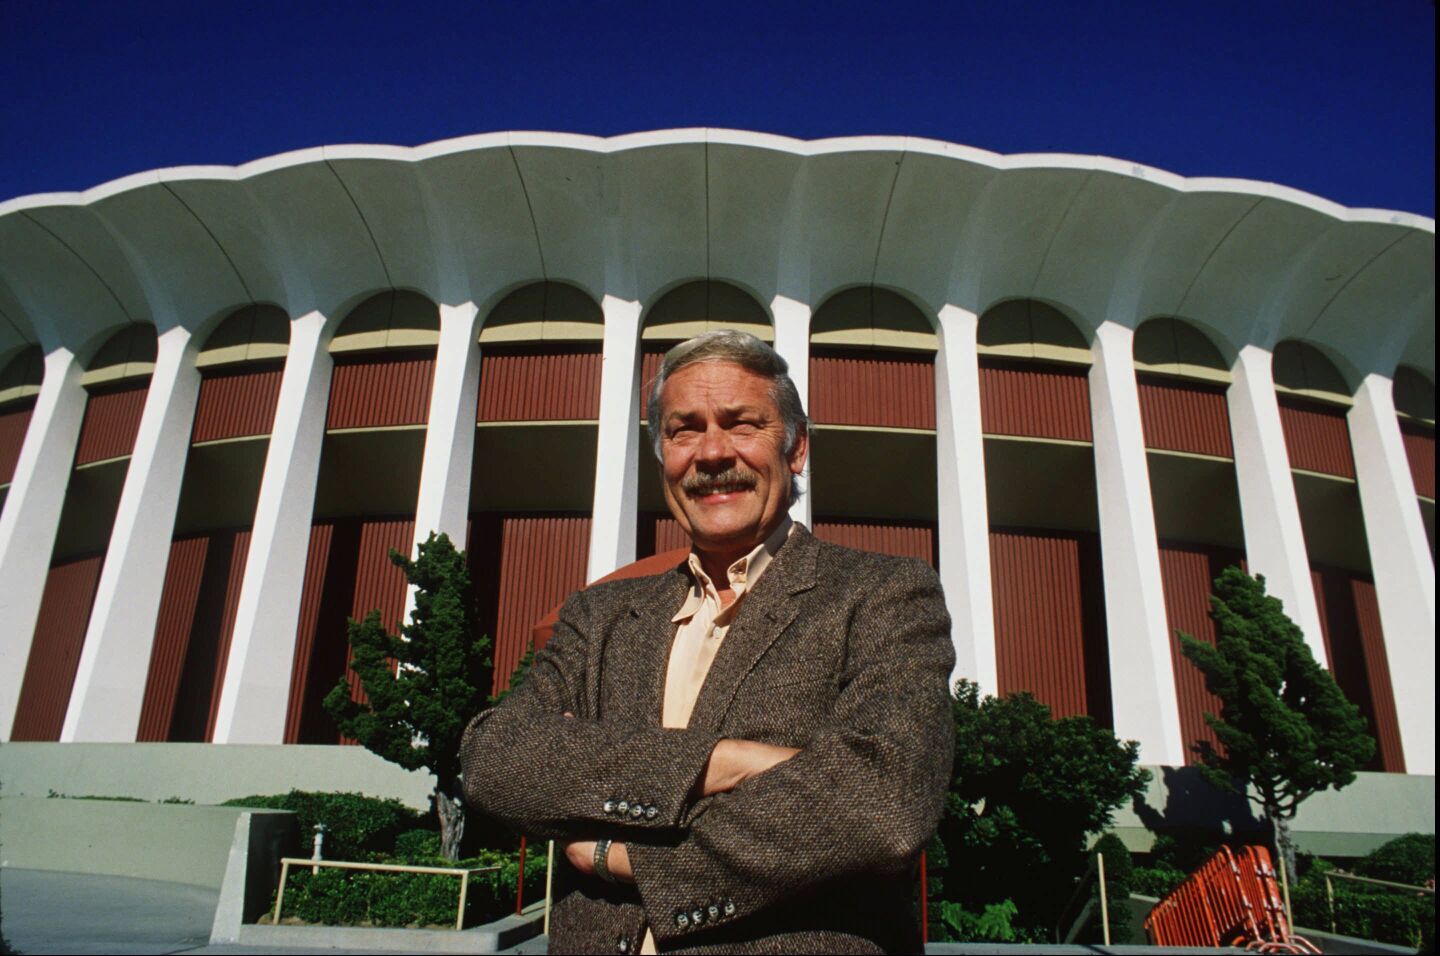 Jerry Buss bought the Lakers from Jack Kent Cooke in 1979, along with the Forum, the NHLs Kings (which he later sold), and a ranch in the Sierra Nevada for a total of $67.5 million.